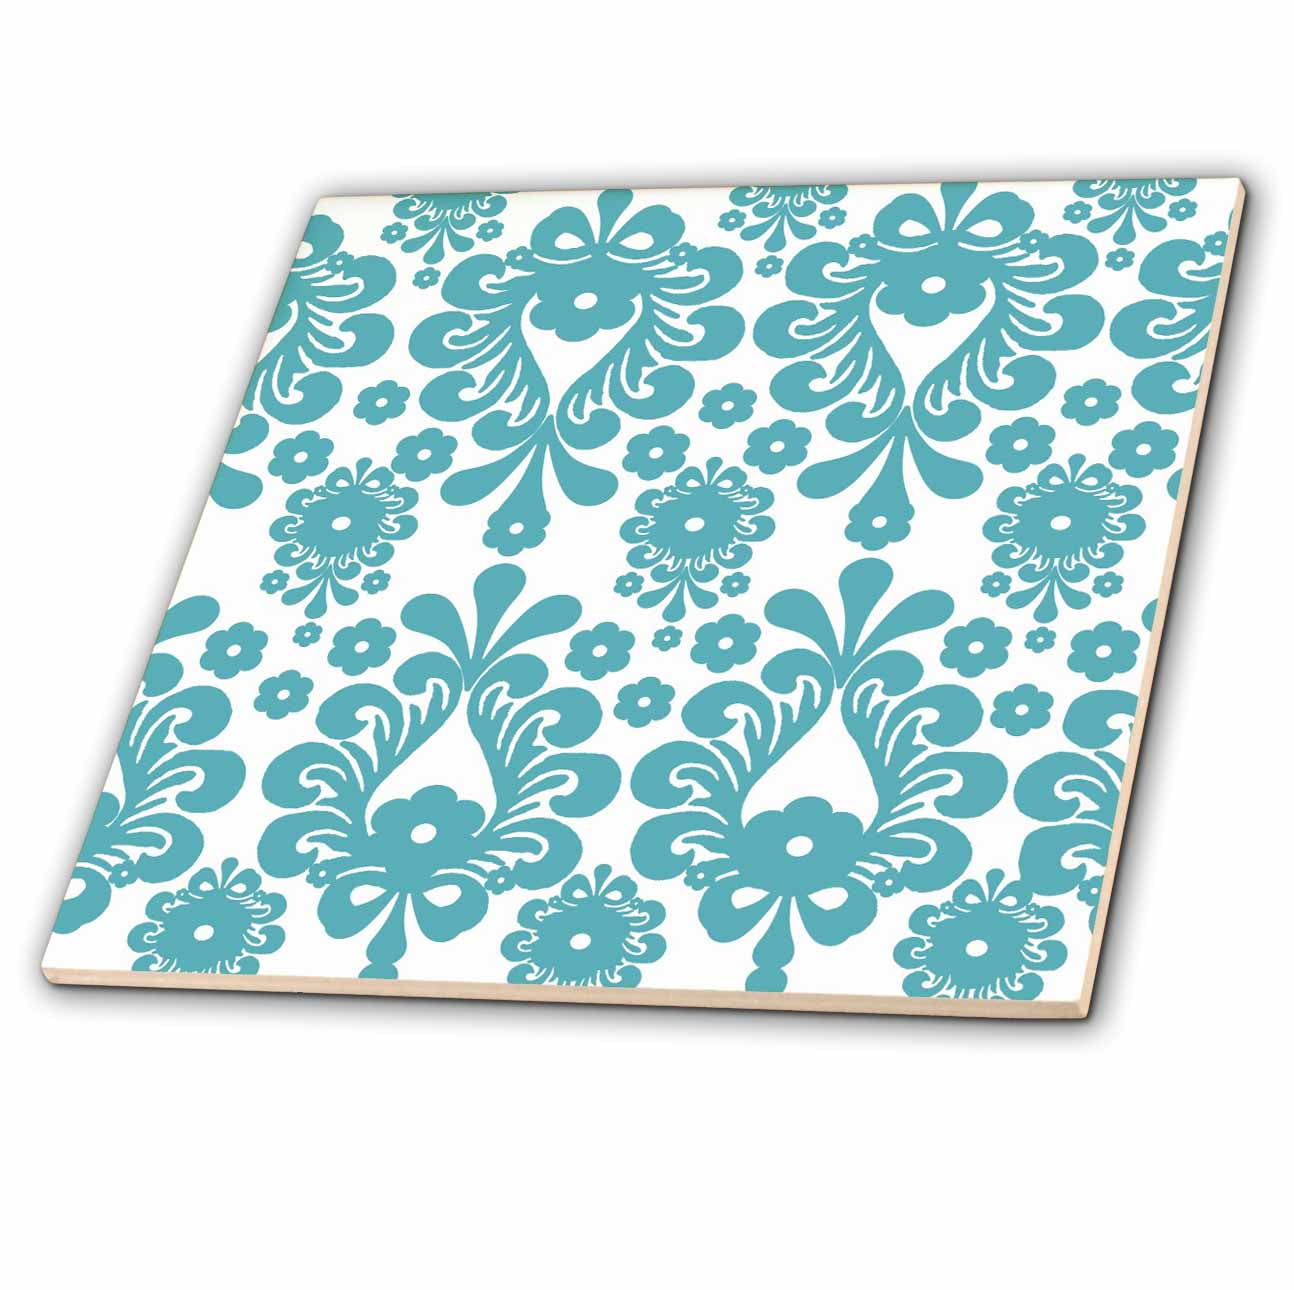 3dRose ct_164508_5 Chic Aqua Teal and White Abstract Floral Glass Tile 4-Inch